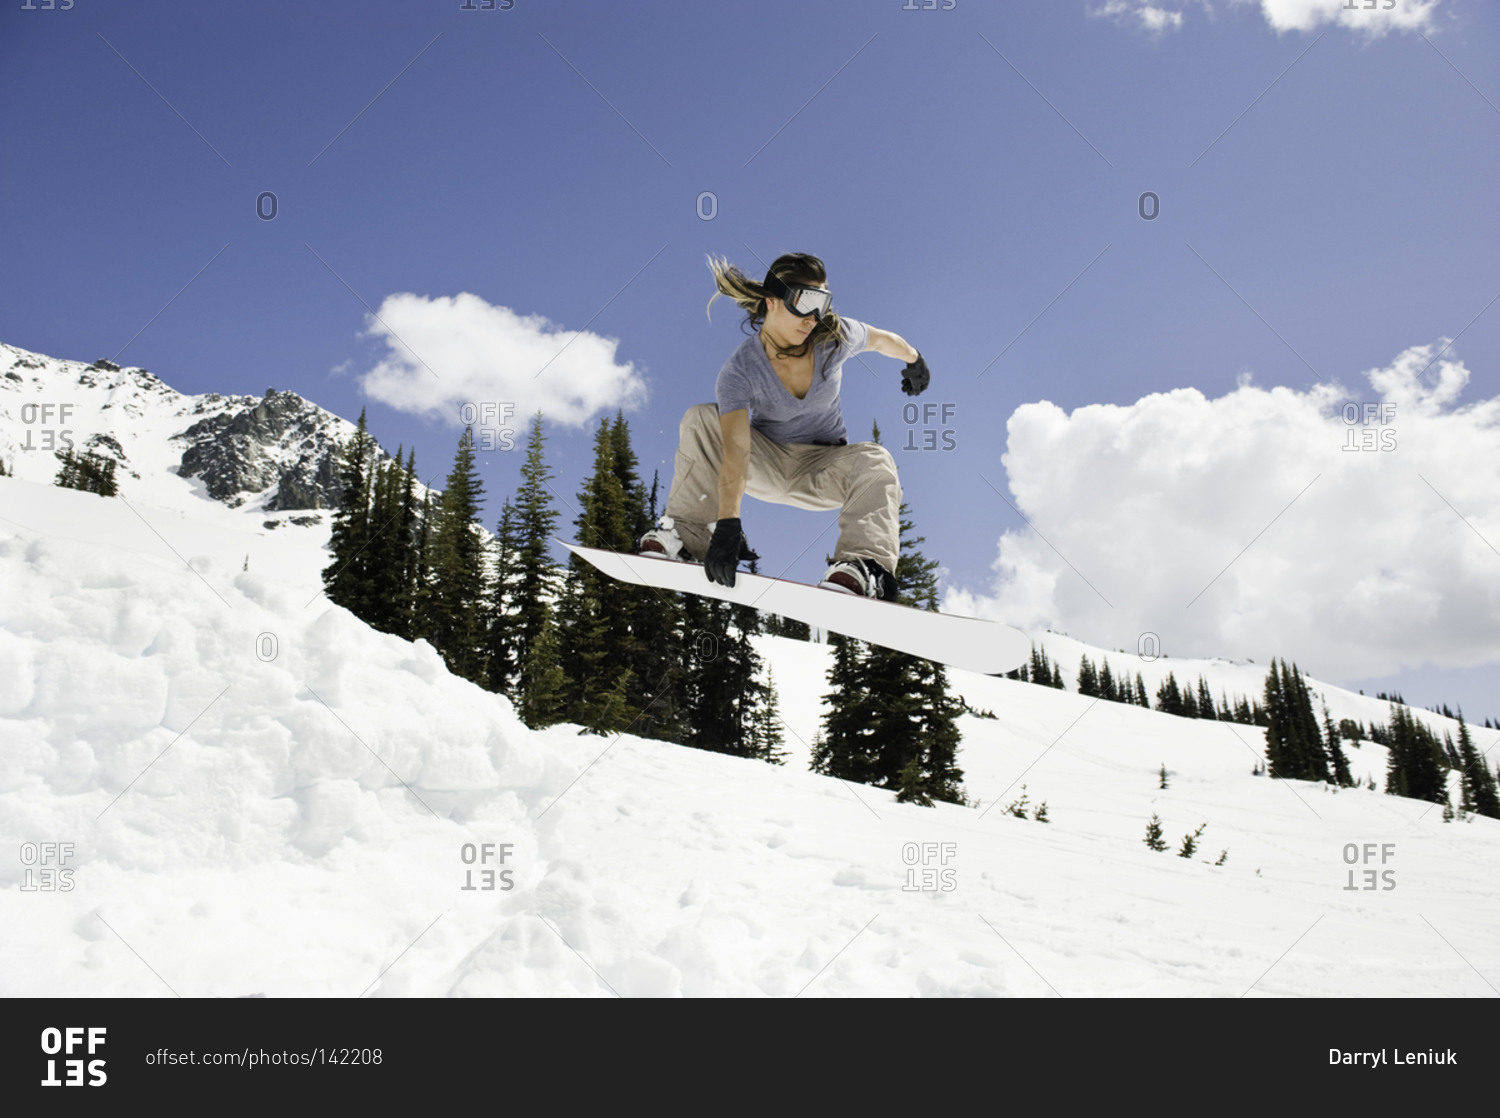 Woman snowboarding on a mountainside